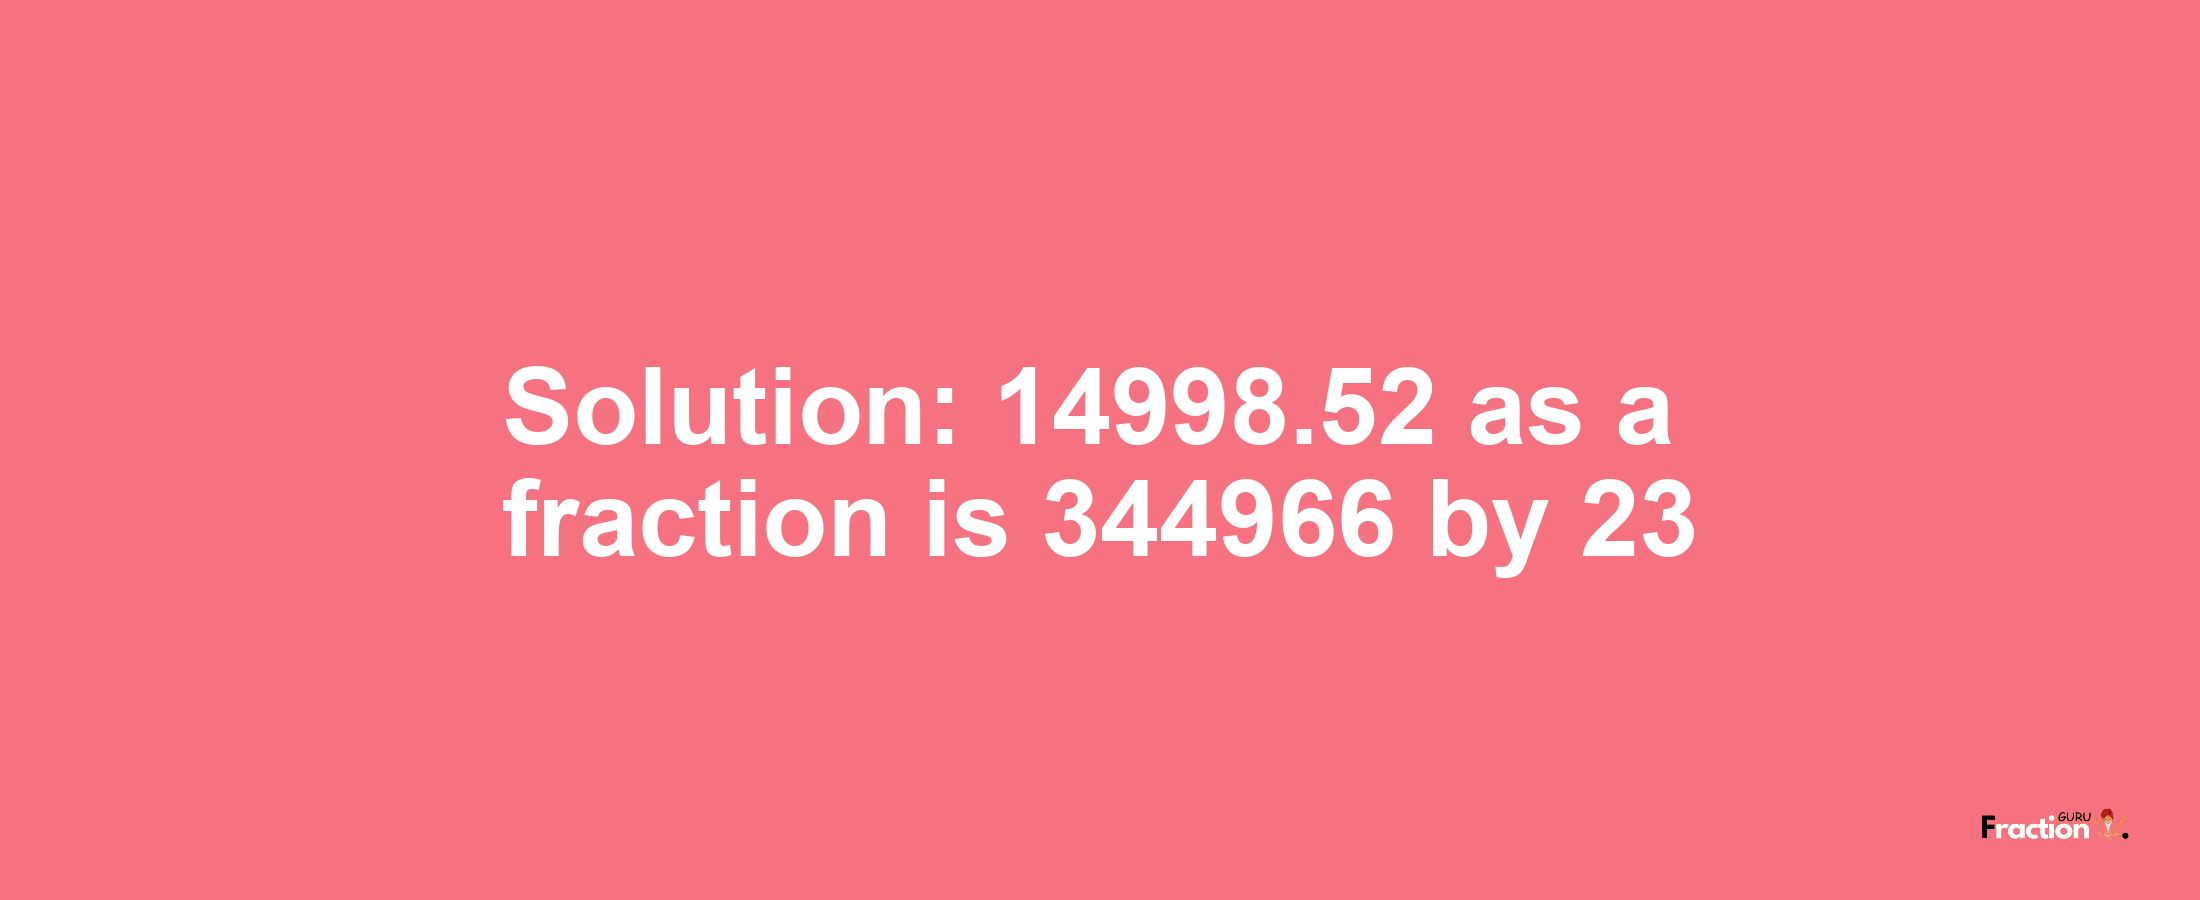 Solution:14998.52 as a fraction is 344966/23